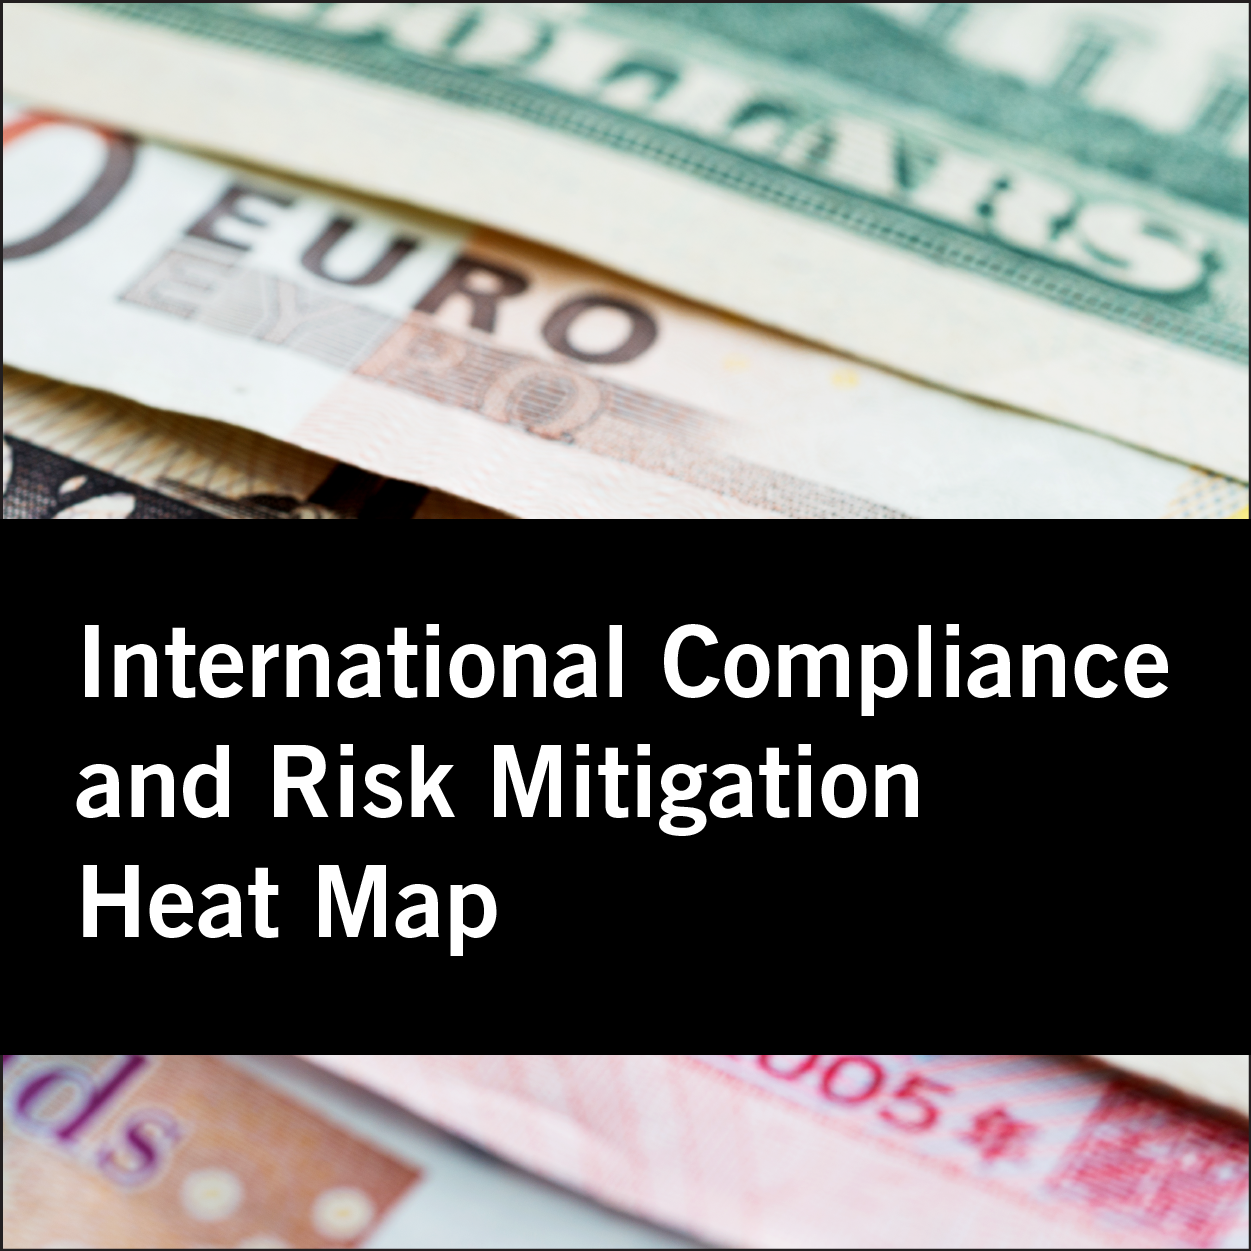 International Compliance and Risk Mitigation Heat Map